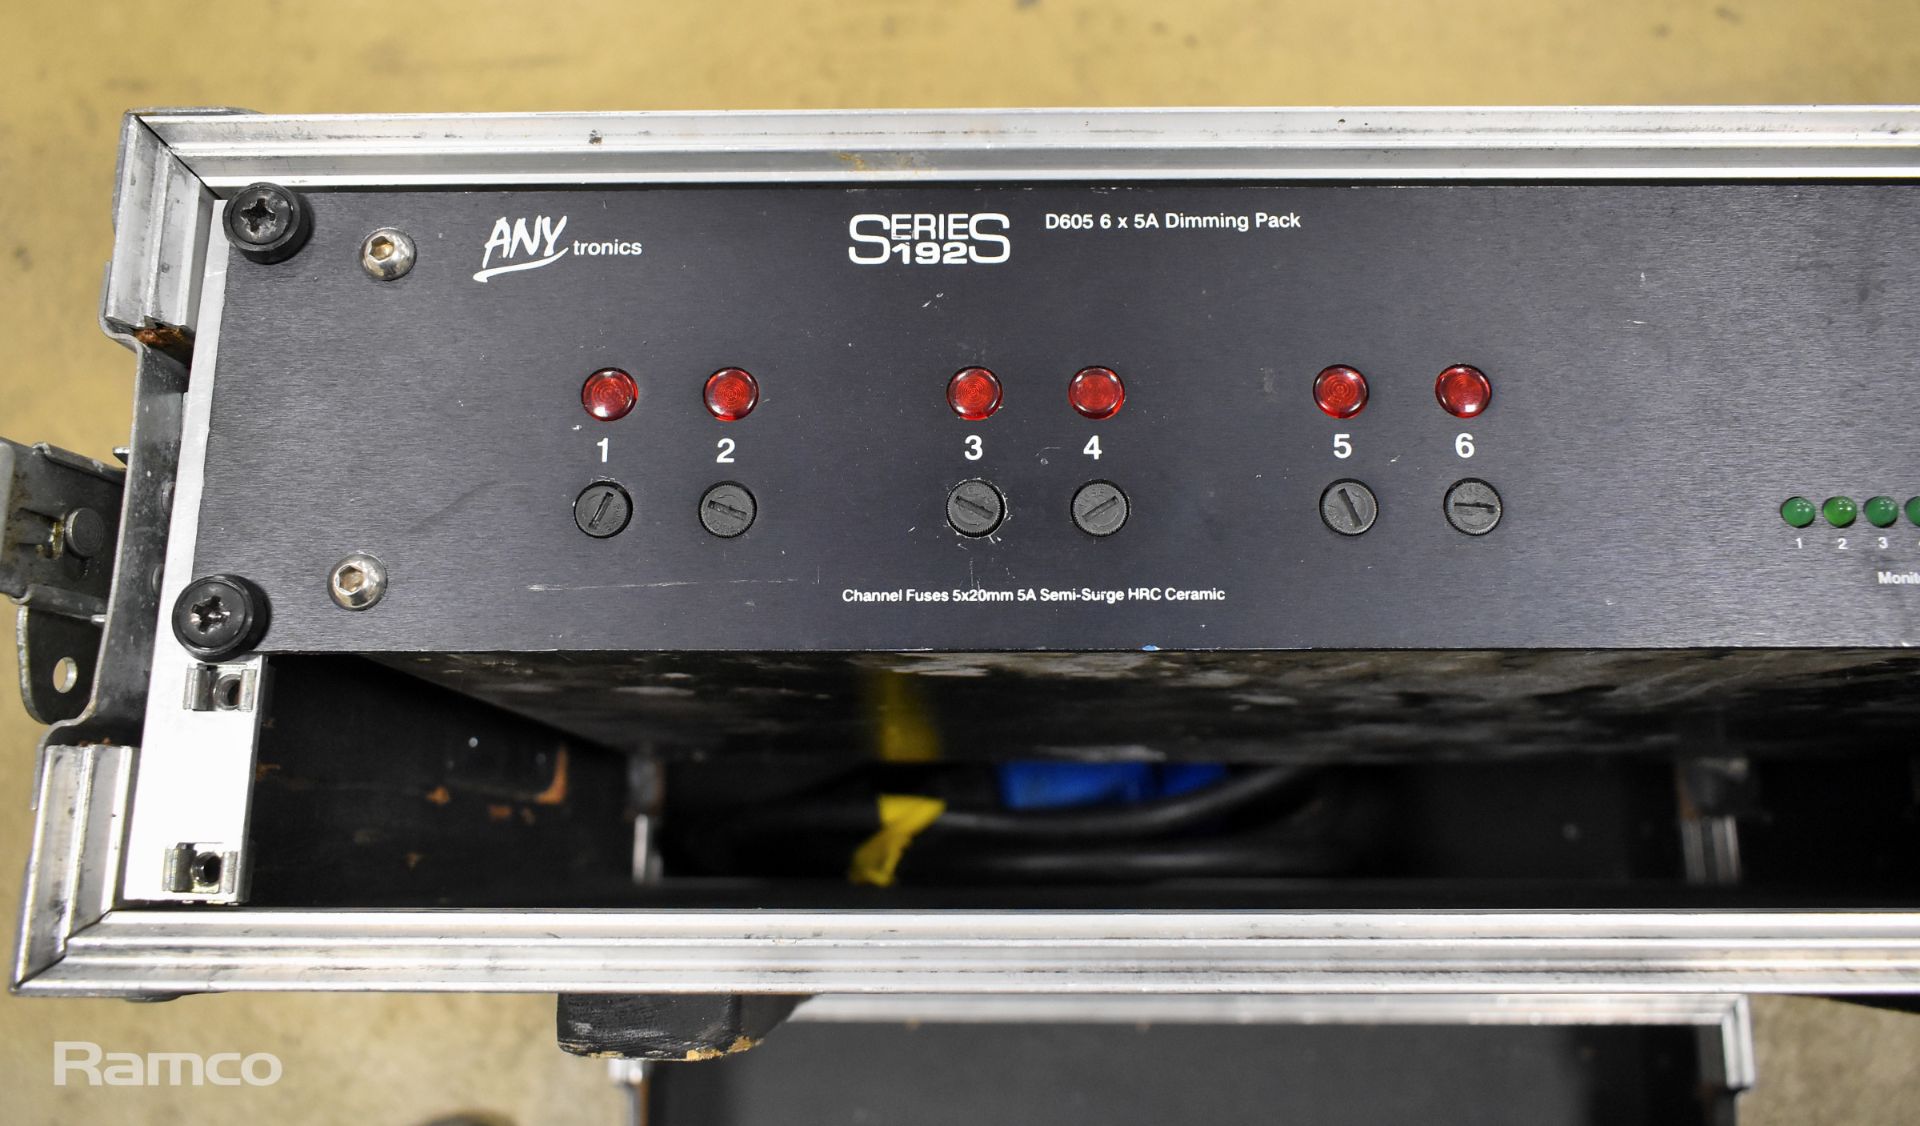 Anytronics DP605 Series 192 6 channel 5A dimmer in flight case - Socapex outlet, 5pin DMX, 32A plug - Image 2 of 6